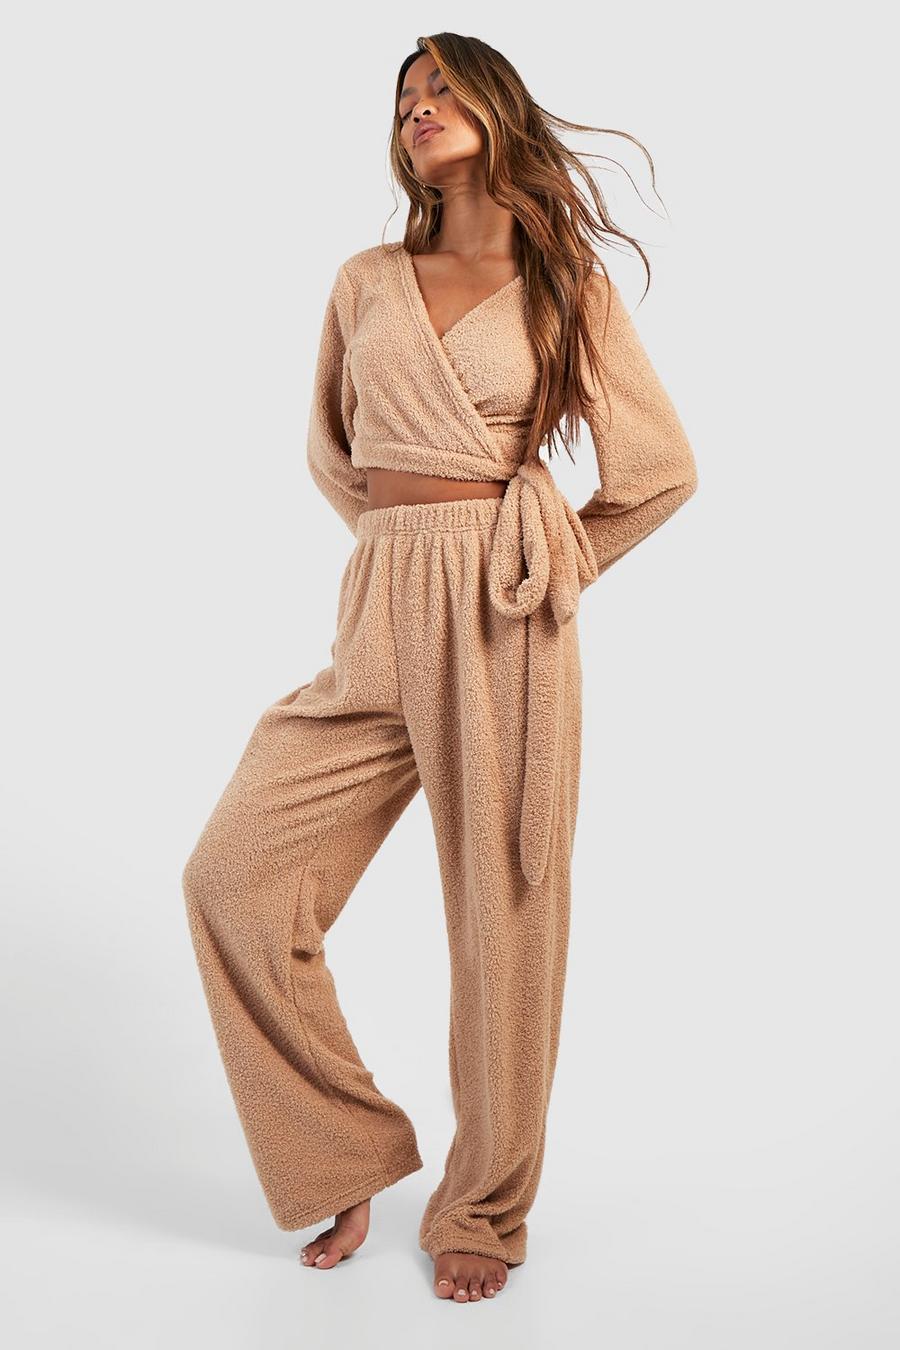 Camel Hers Matching Teddy Wrap Top & Pants Loungewear Set image number 1